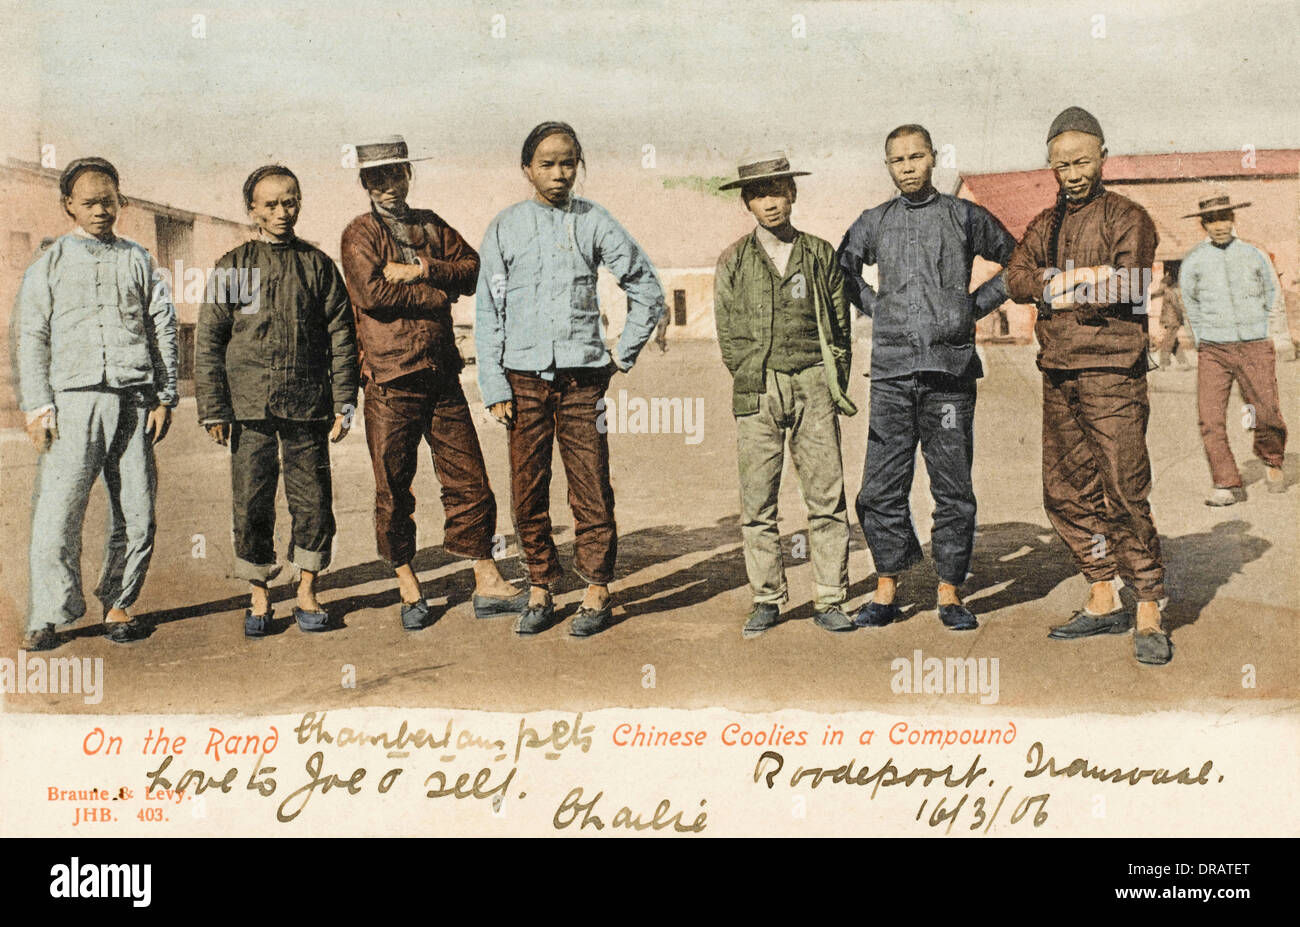 South Africa - Transvaal - Chinese Coolies in a Compound Stock Photo